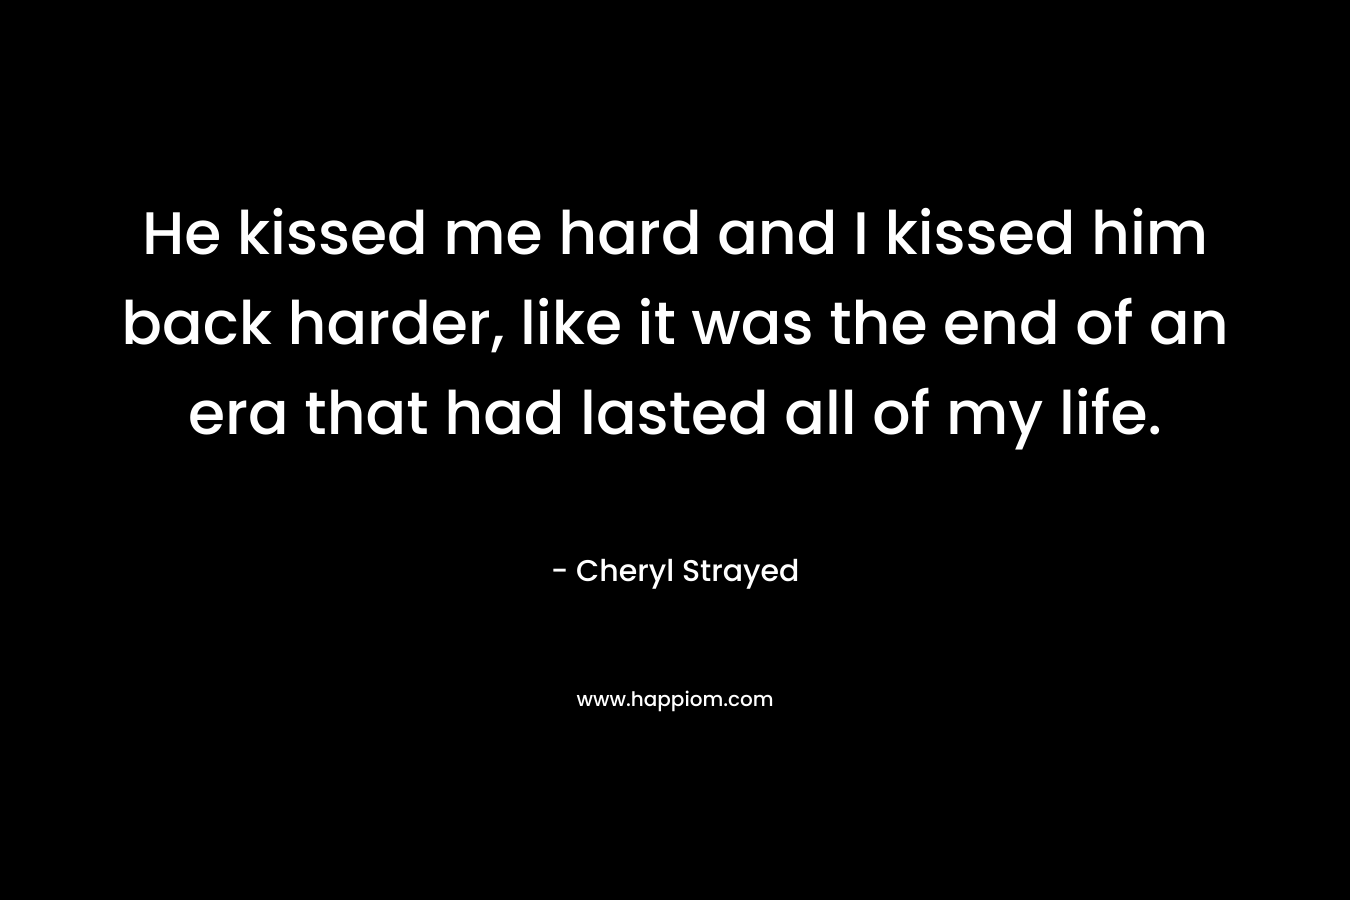 He kissed me hard and I kissed him back harder, like it was the end of an era that had lasted all of my life. – Cheryl Strayed